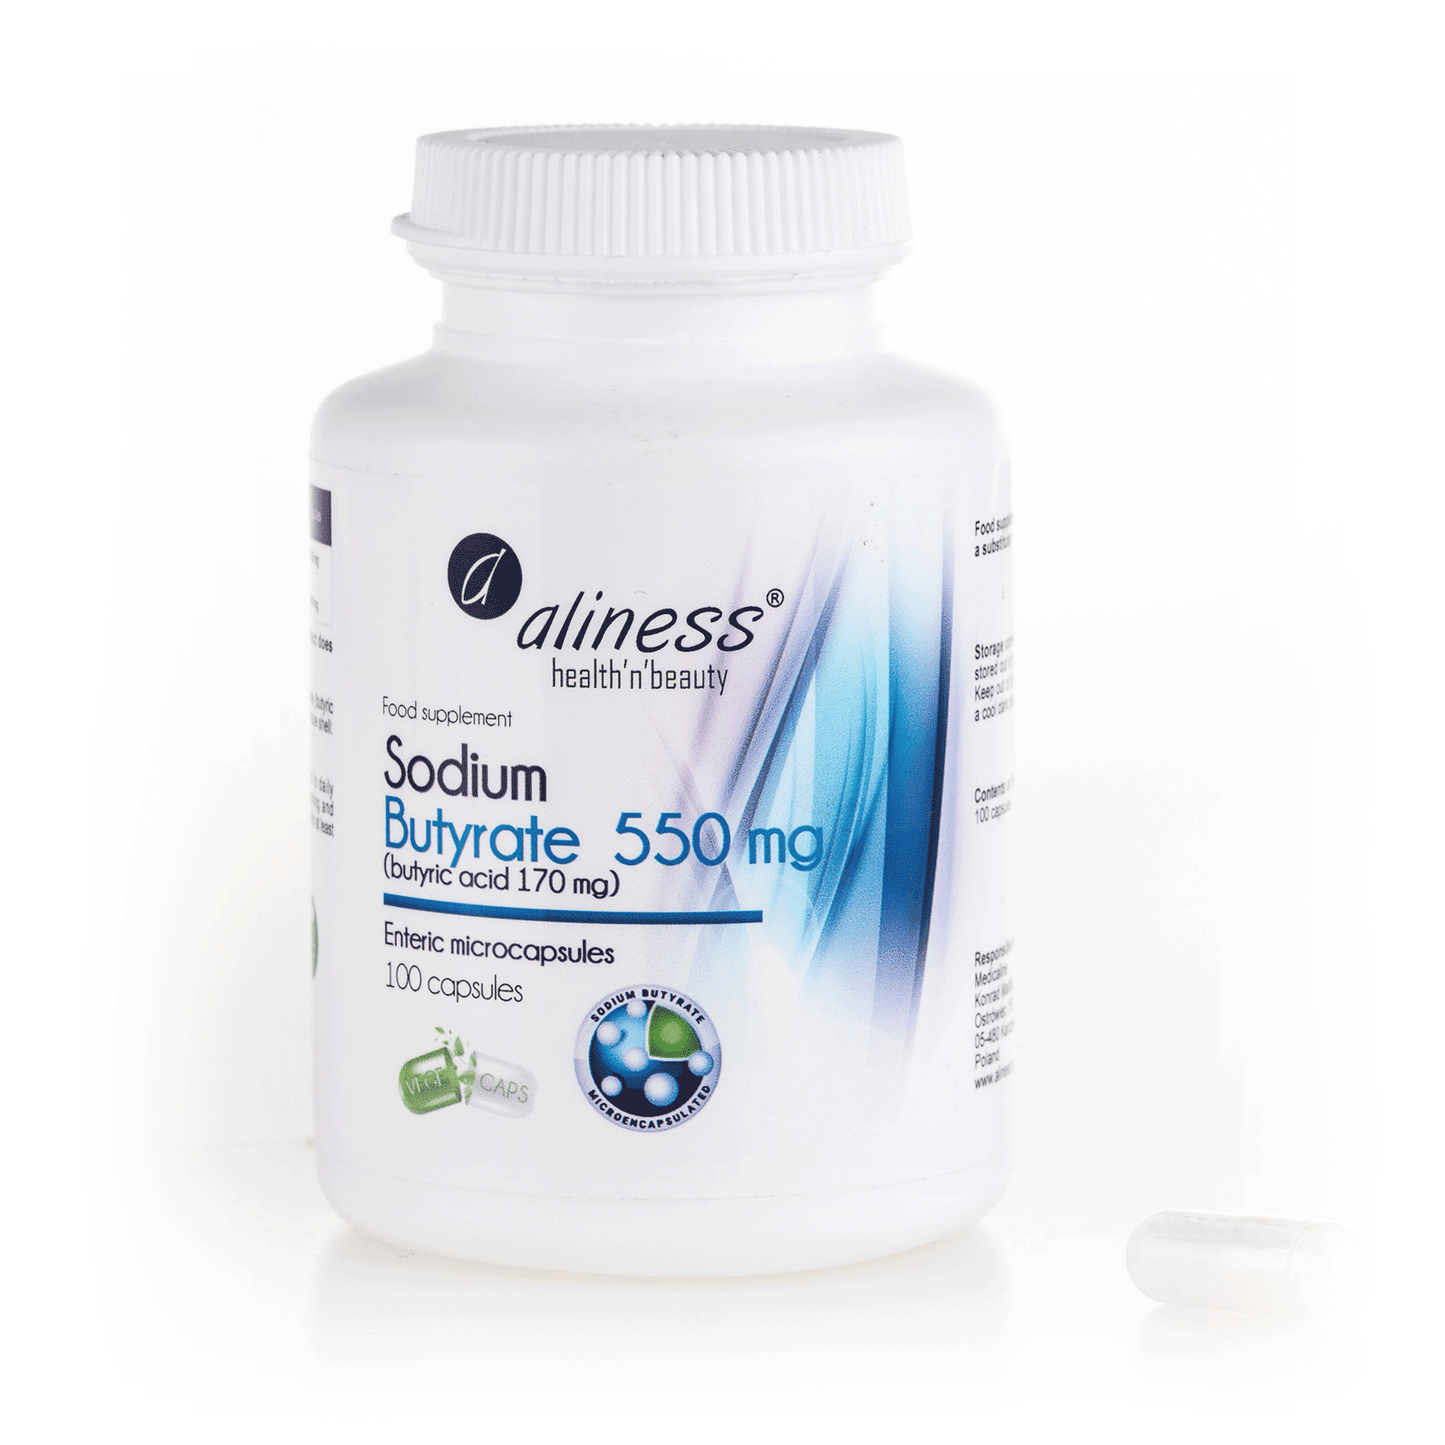 100 capsules of Sodium Butyrate Supplement, IBS Benefits and Symptoms Relief, Leaky Gut Prevention